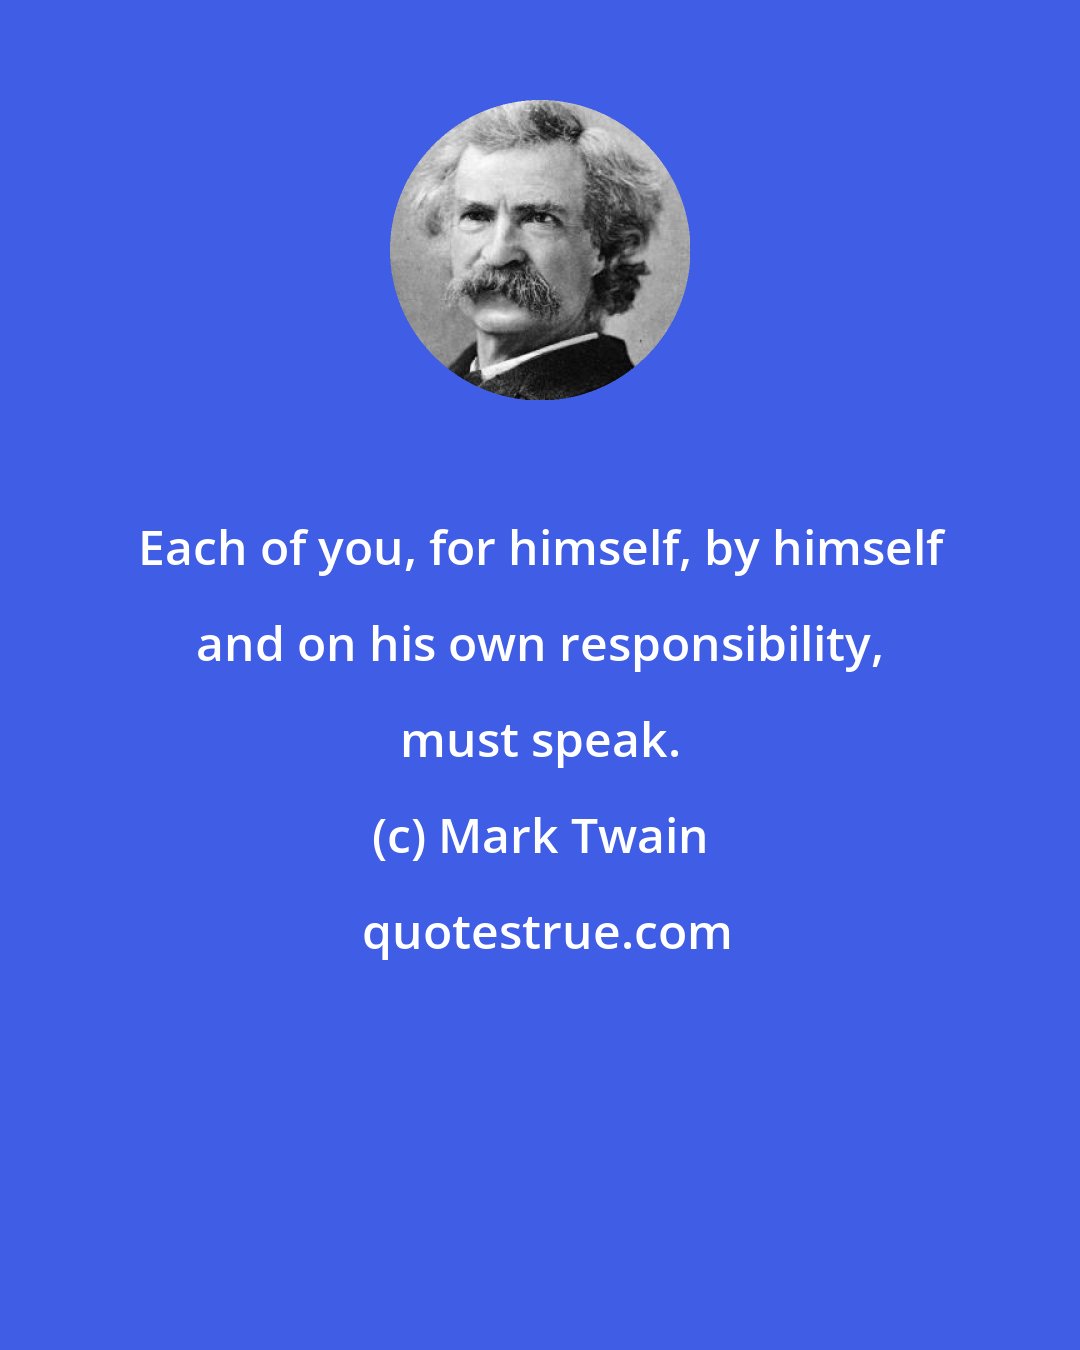 Mark Twain: Each of you, for himself, by himself and on his own responsibility, must speak.